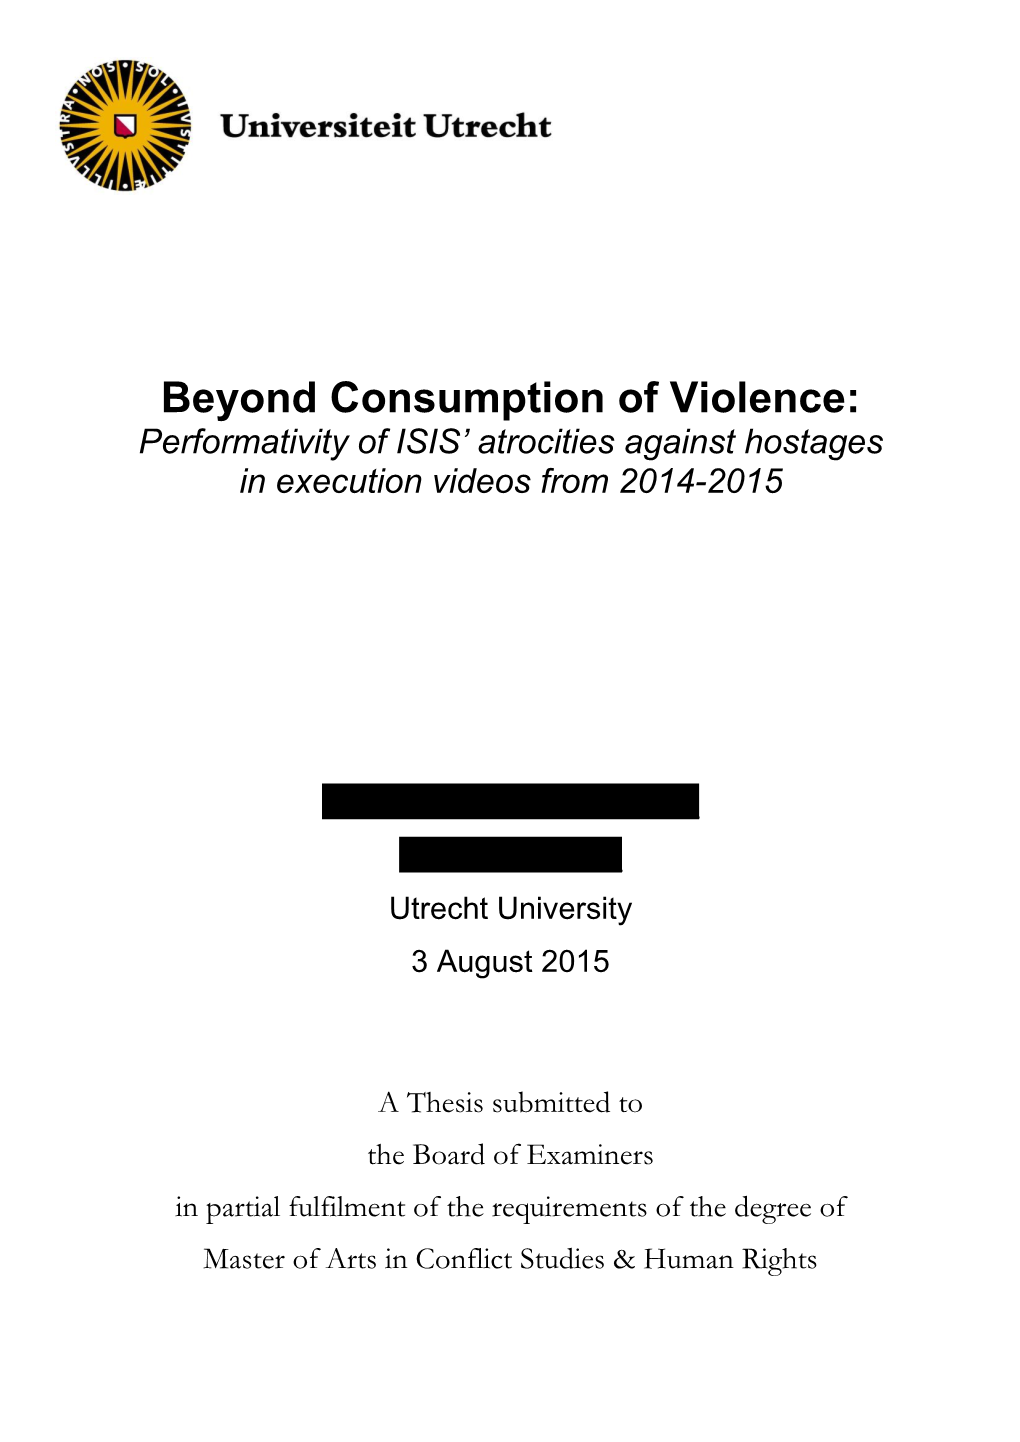 Beyond Consumption of Violence: Performativity of ISIS’ Atrocities Against Hostages in Execution Videos from 2014-2015